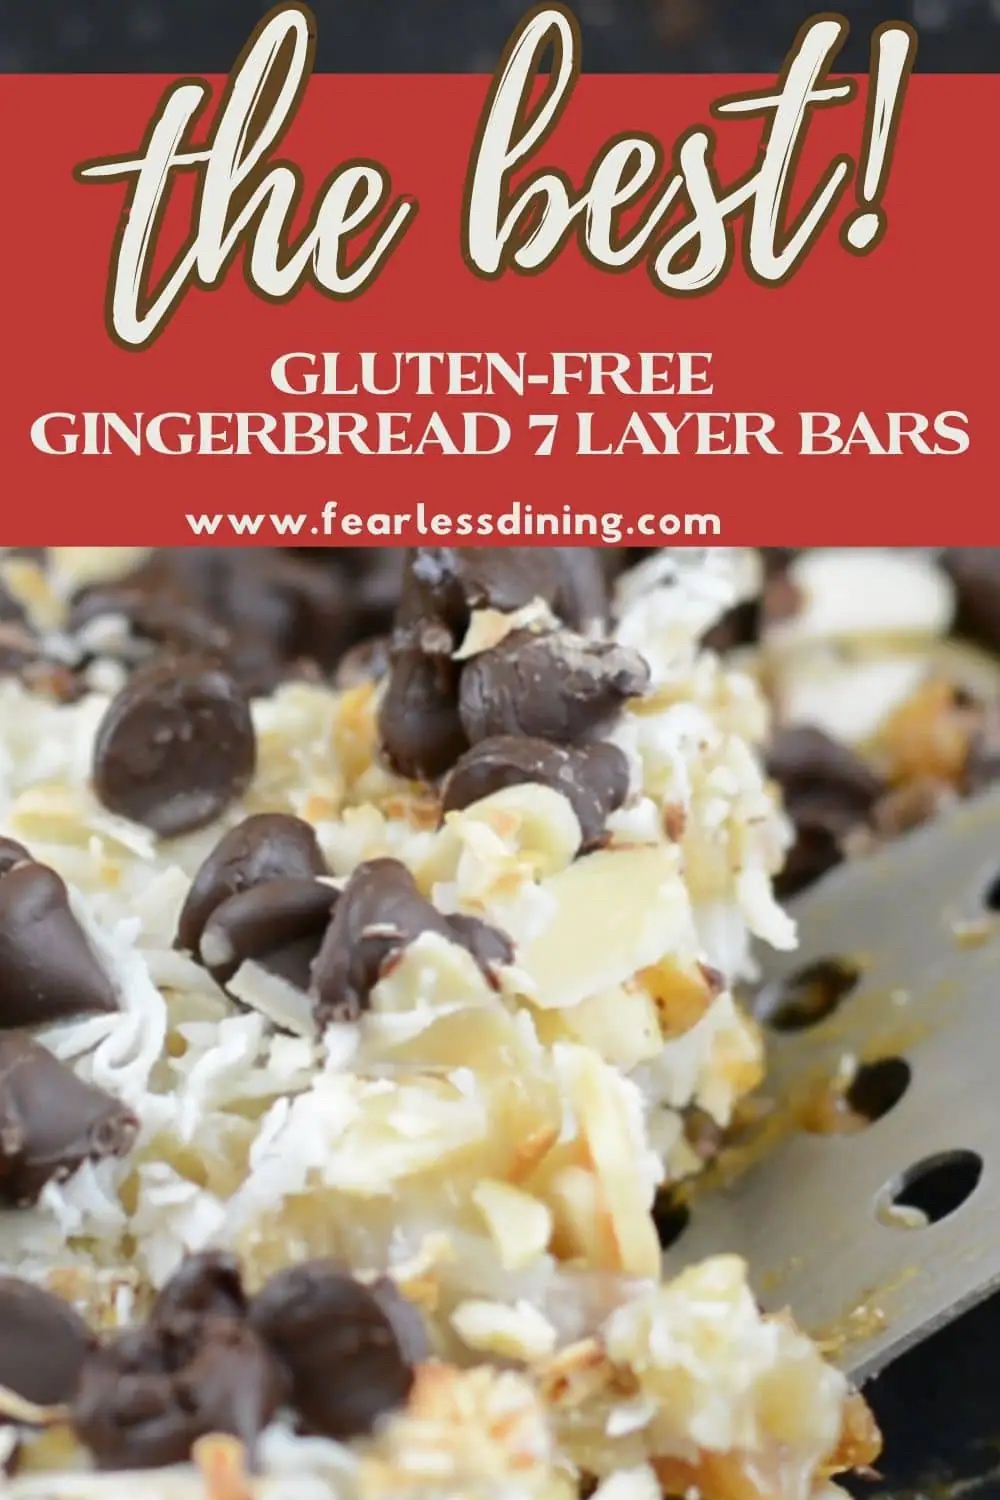 Are Rolos Gluten Free? - Fearless Dining